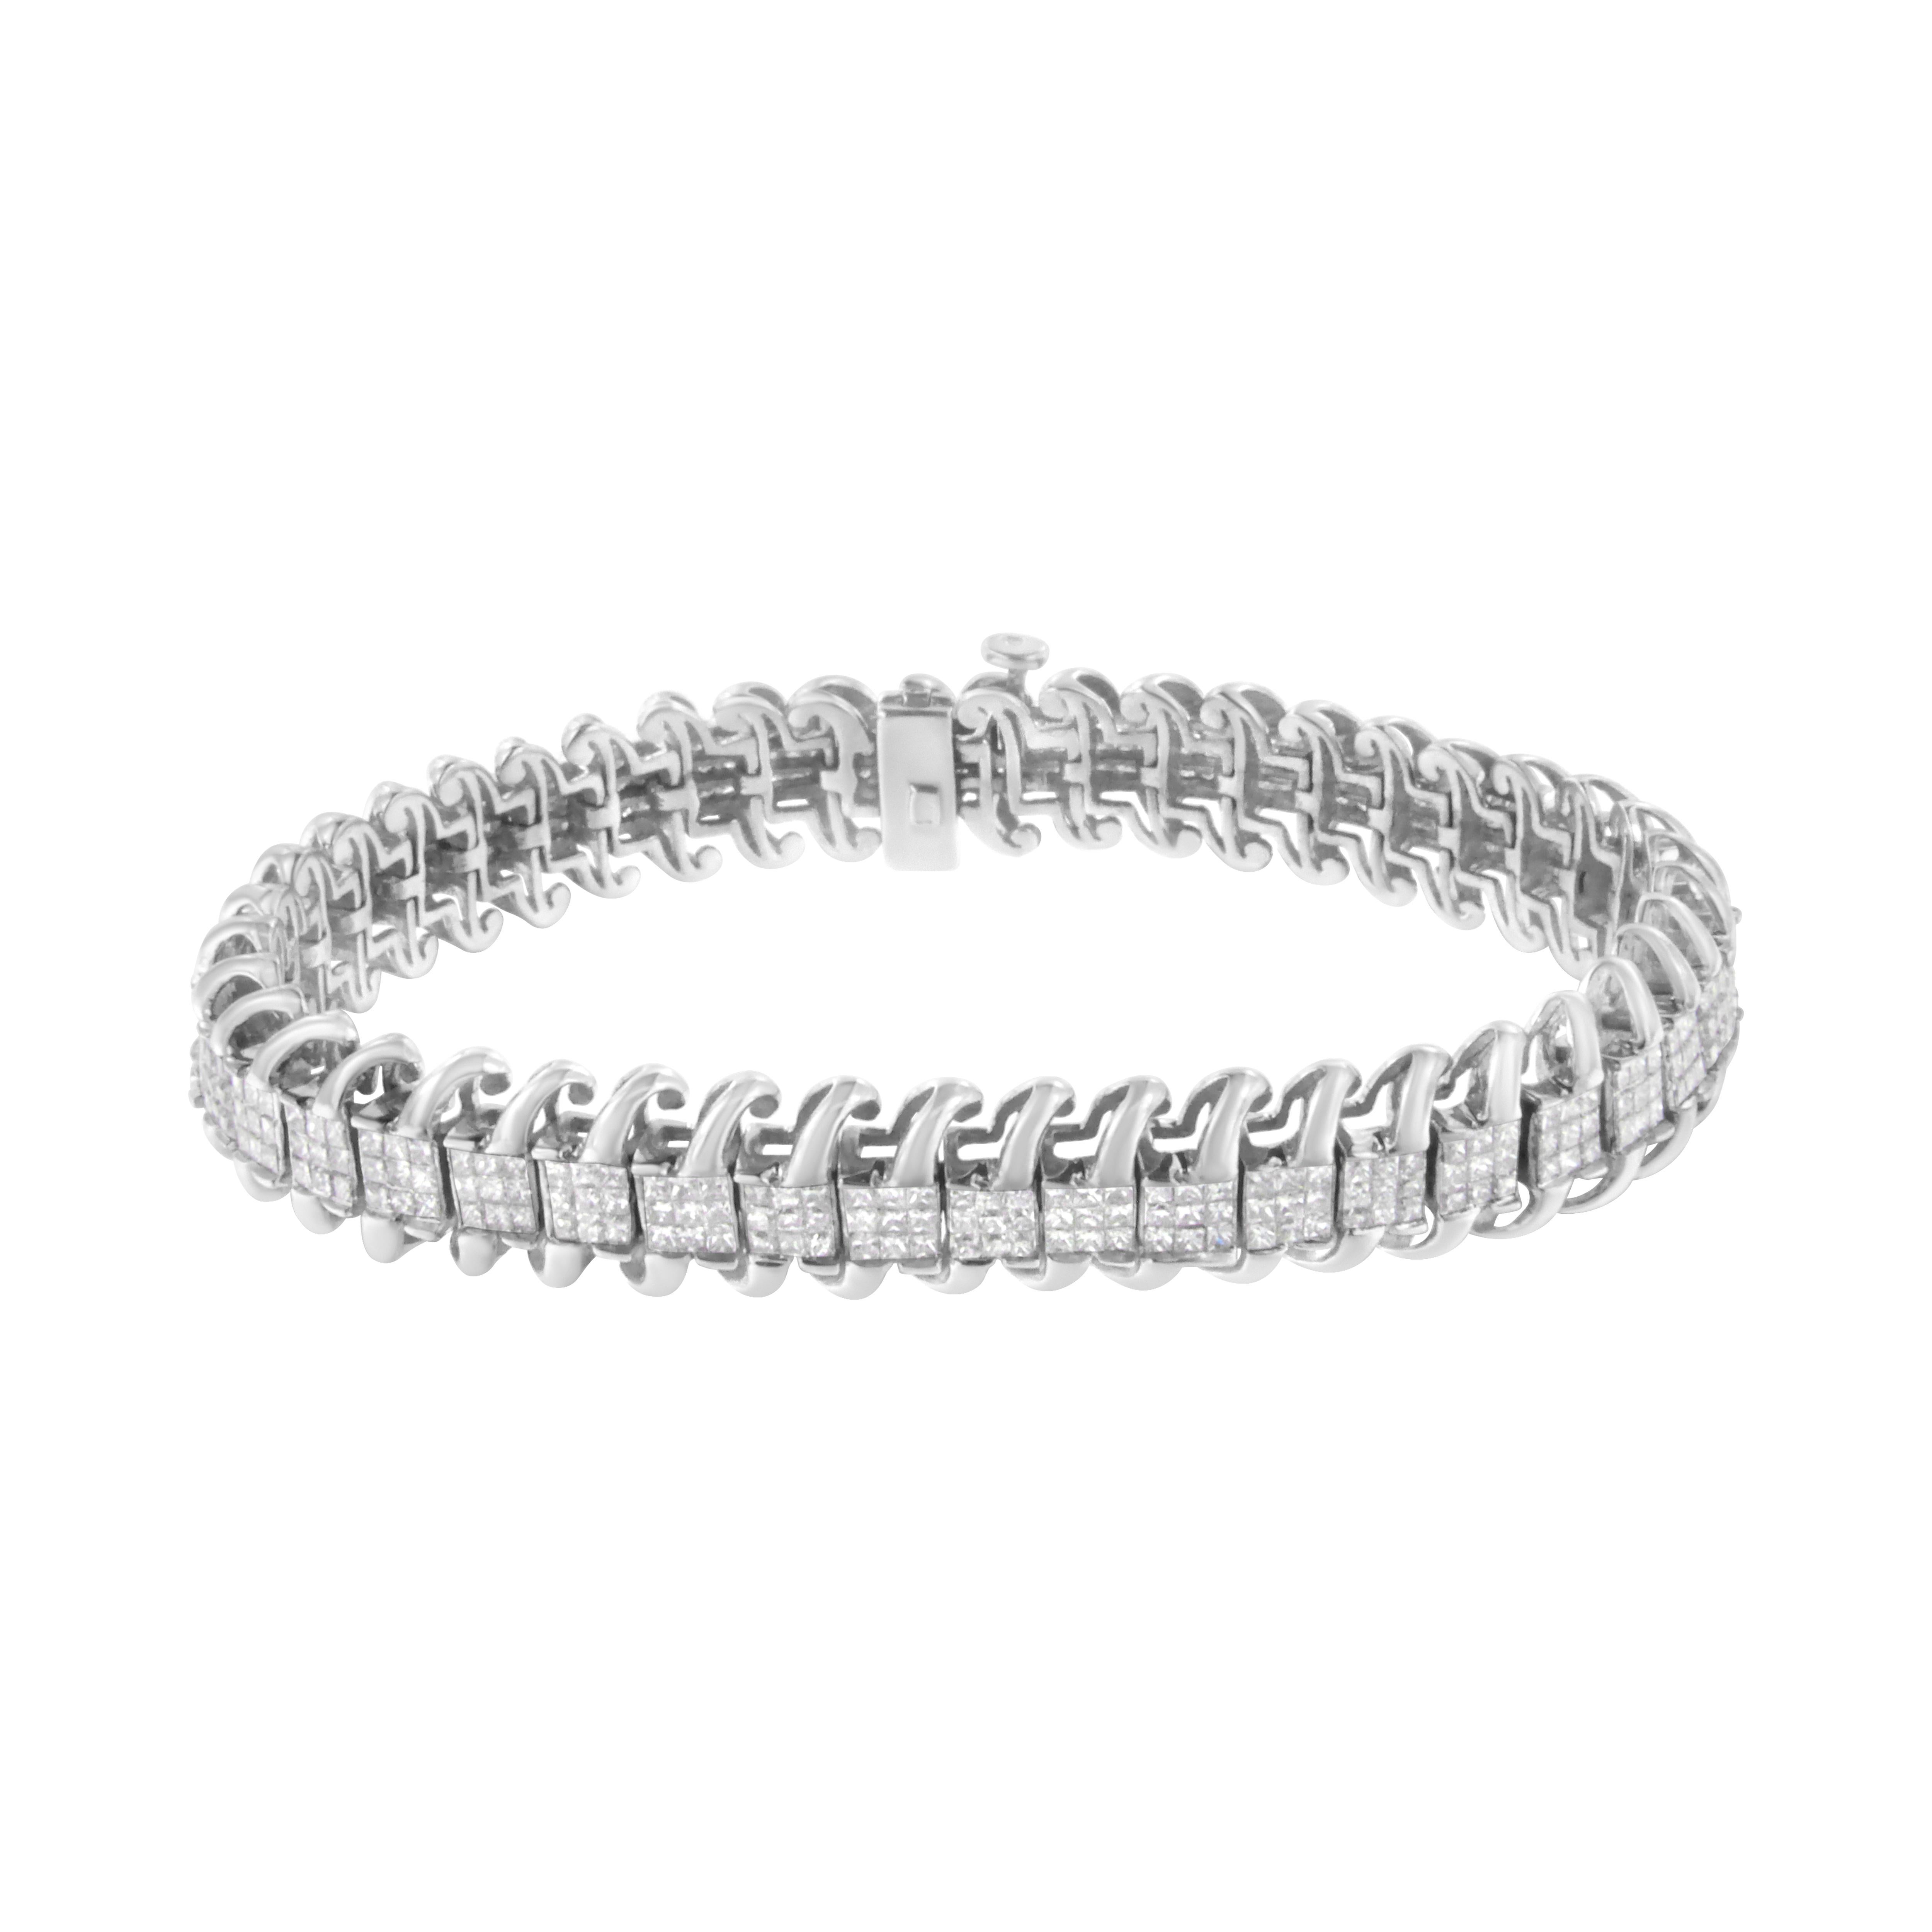 This unique and elegant 14k white gold tennis bracelet features 5 carats of beautiful, natural diamonds. This piece features square links, each set with 8 princess-cut diamonds and flanked by waves of white gold. This bracelet will add a luxurious